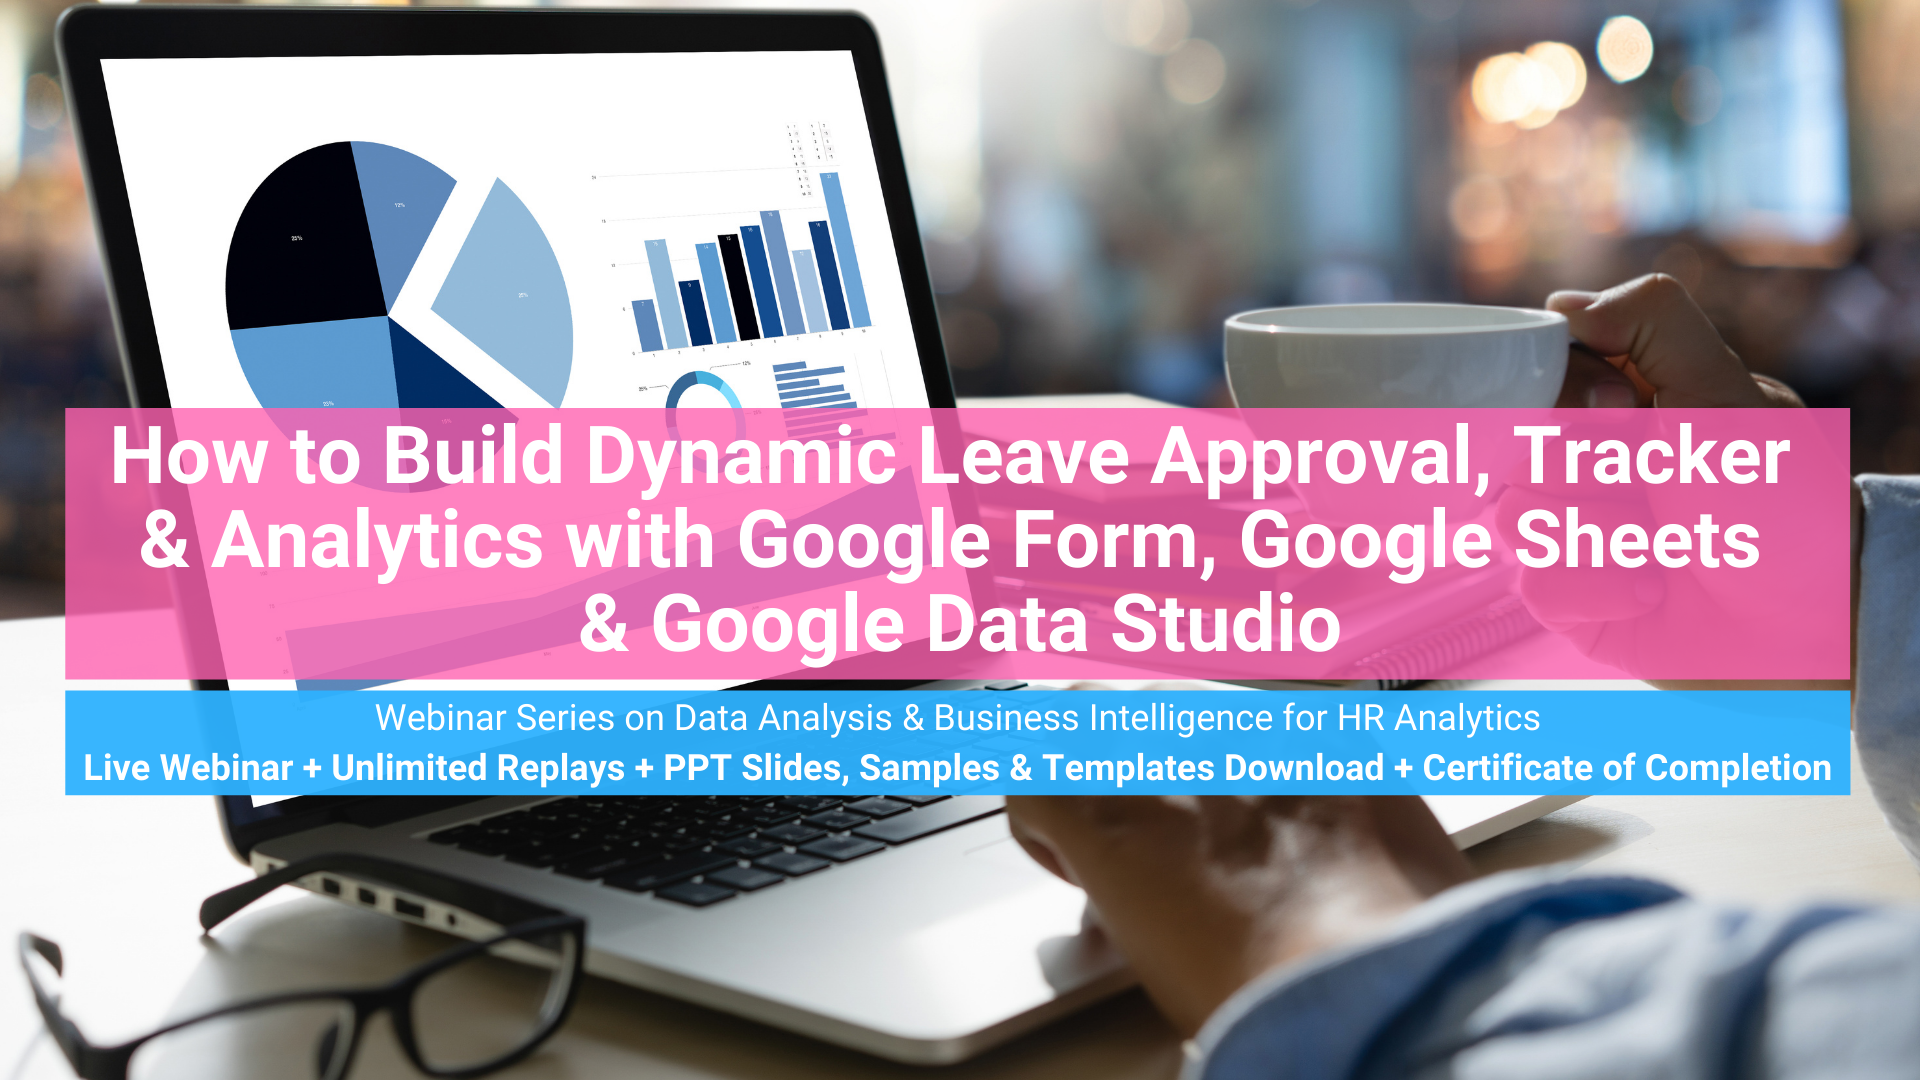 How to Build Dynamic Leave Approval, Tracker & Analytics with Google